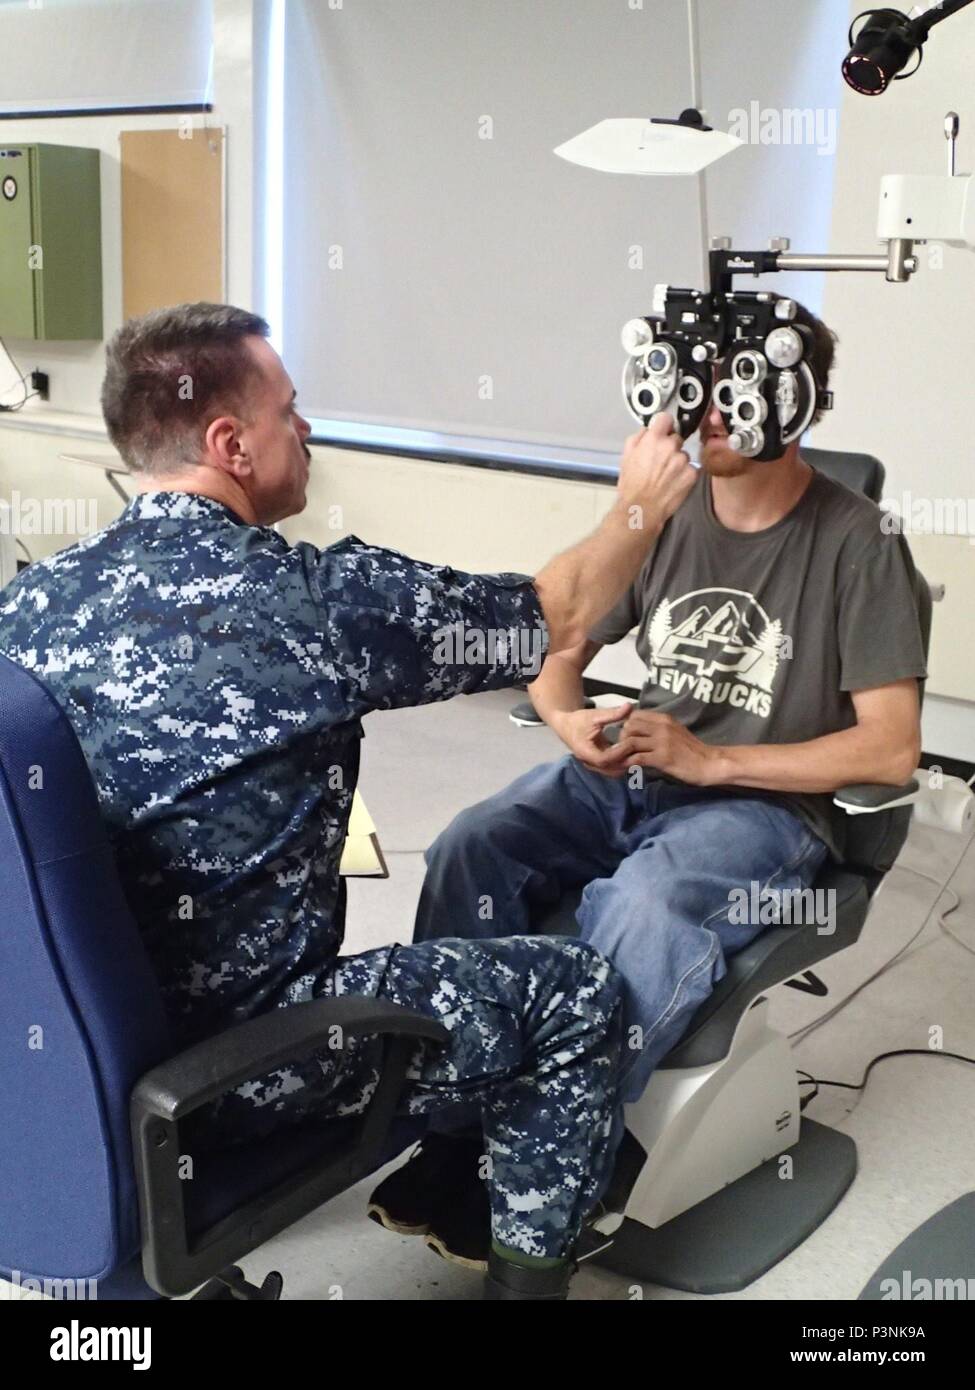 Capt. Philbrook Mason, an optometrist from the Navy Operational Support Center, Quincy, Mass., conducts an eye exam on a patient during Greater Chenango Cares on July 15, 2016.  Greater Chenango Cares is one of the Innovative Readiness Training missions which provides real-world training in a joint civil-military environment while delivering world class medical care to the people of Chenango County, N.Y., from July 15-24. Stock Photo